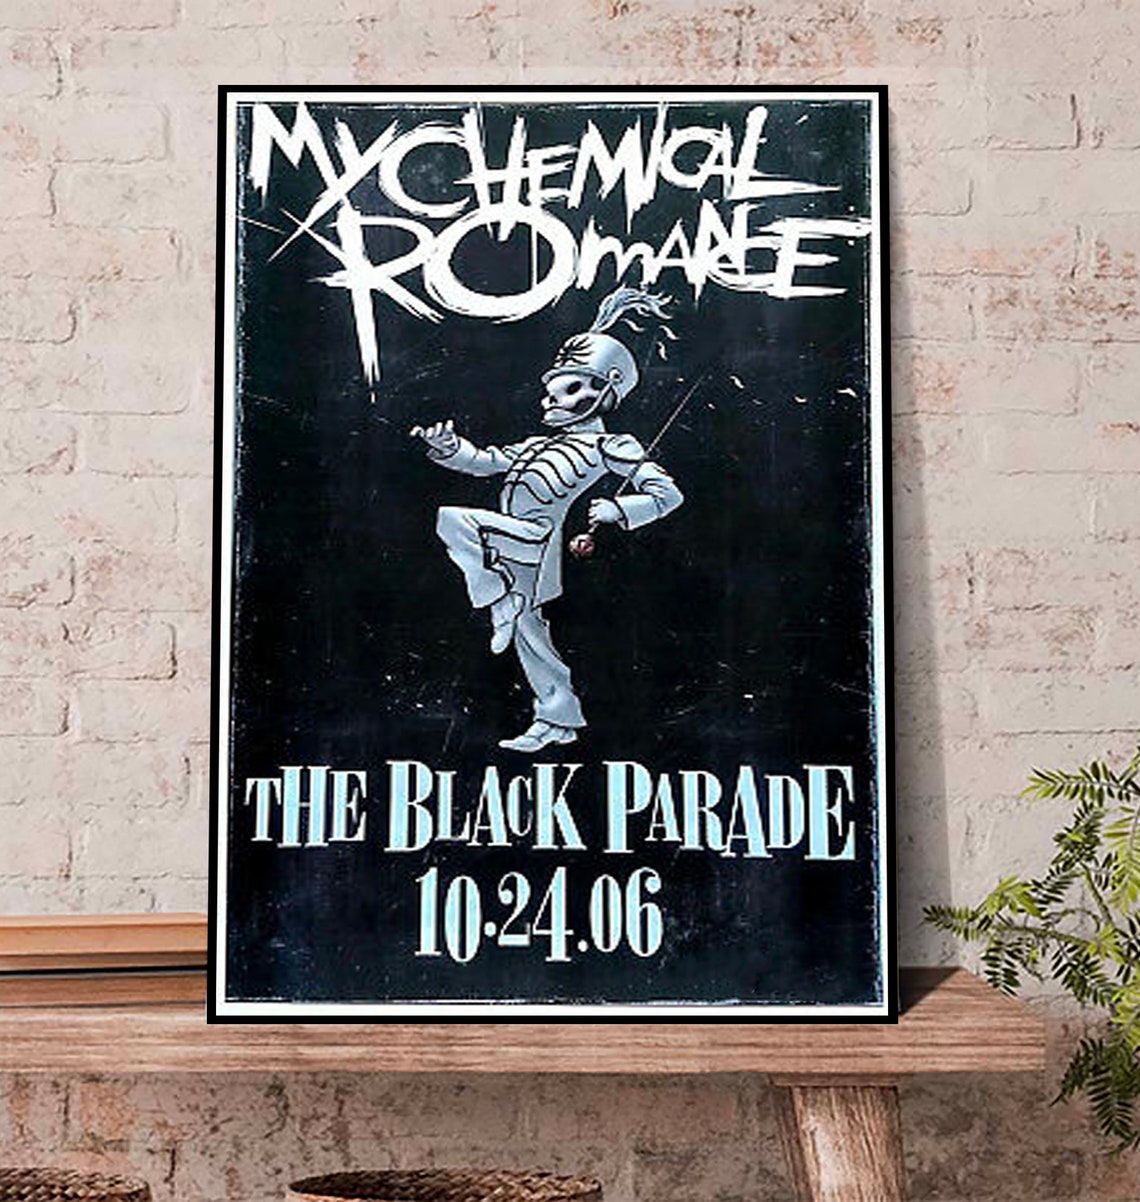 My chemical romance The Blakc Parade Poster, The Foundations of Decay Poster, My chemical romance come back singatures Poster, MCR Poster